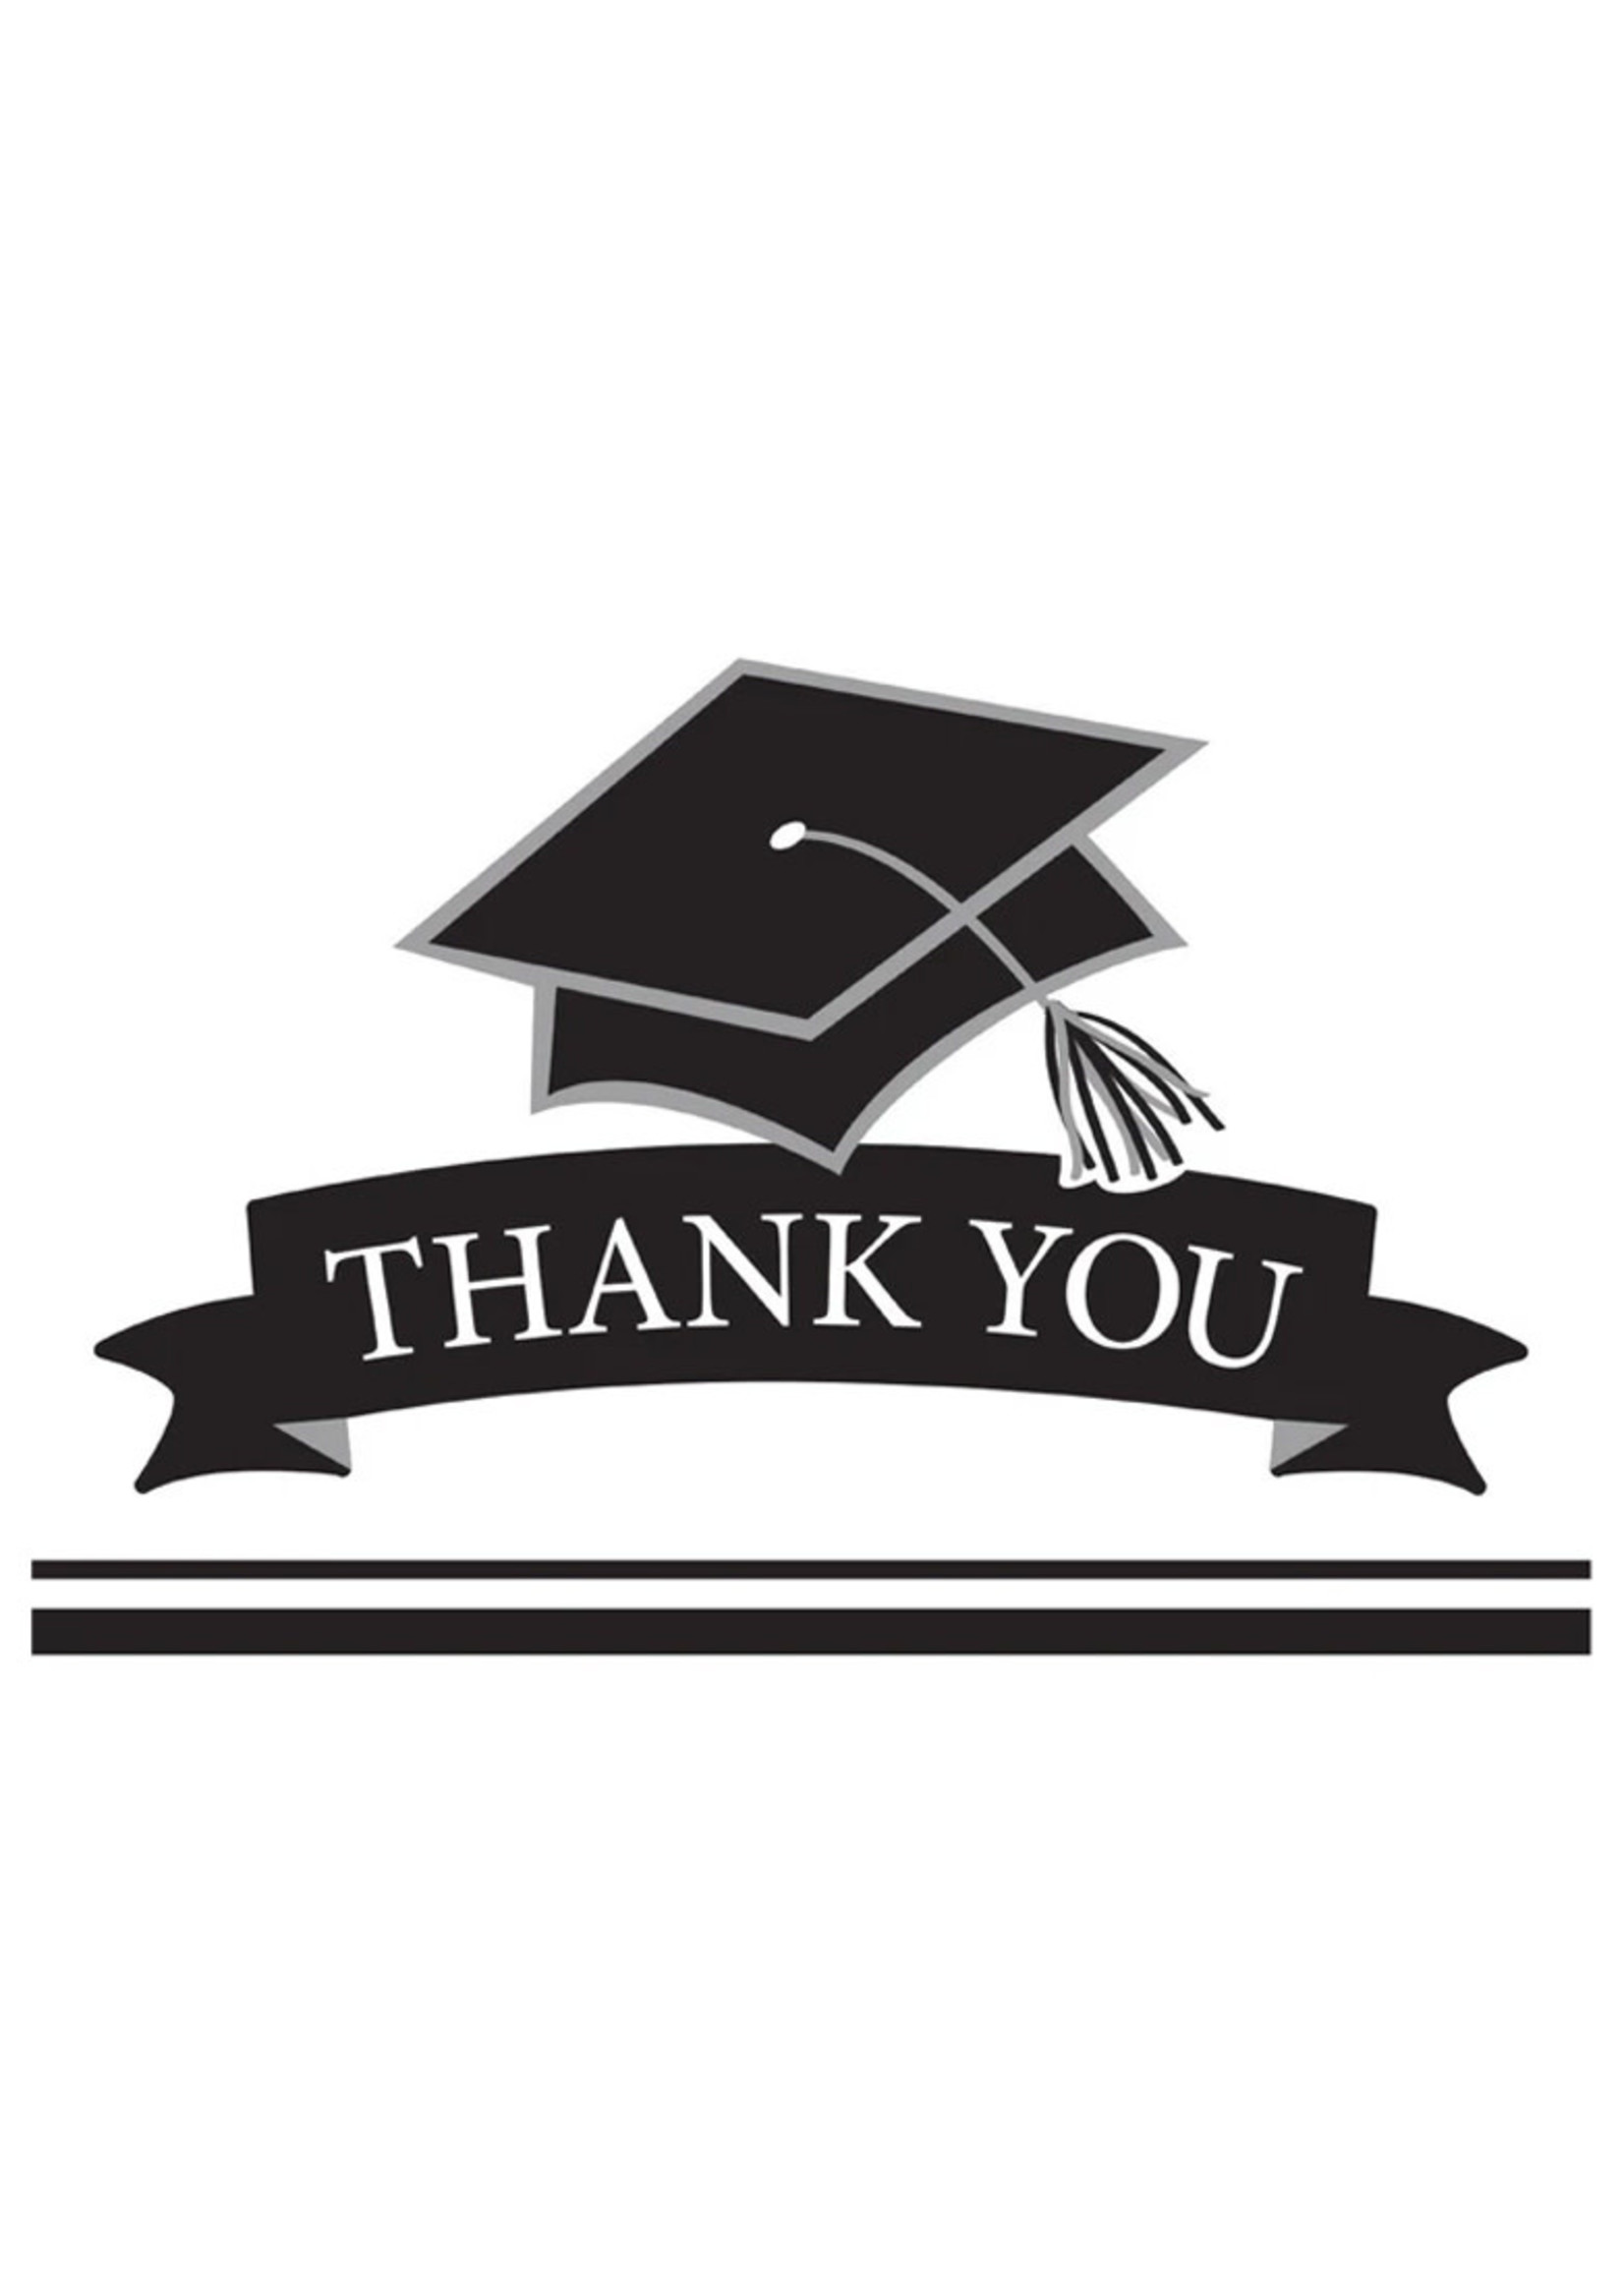 Creative Converting Graduation White Thank You Notes - 25 ct